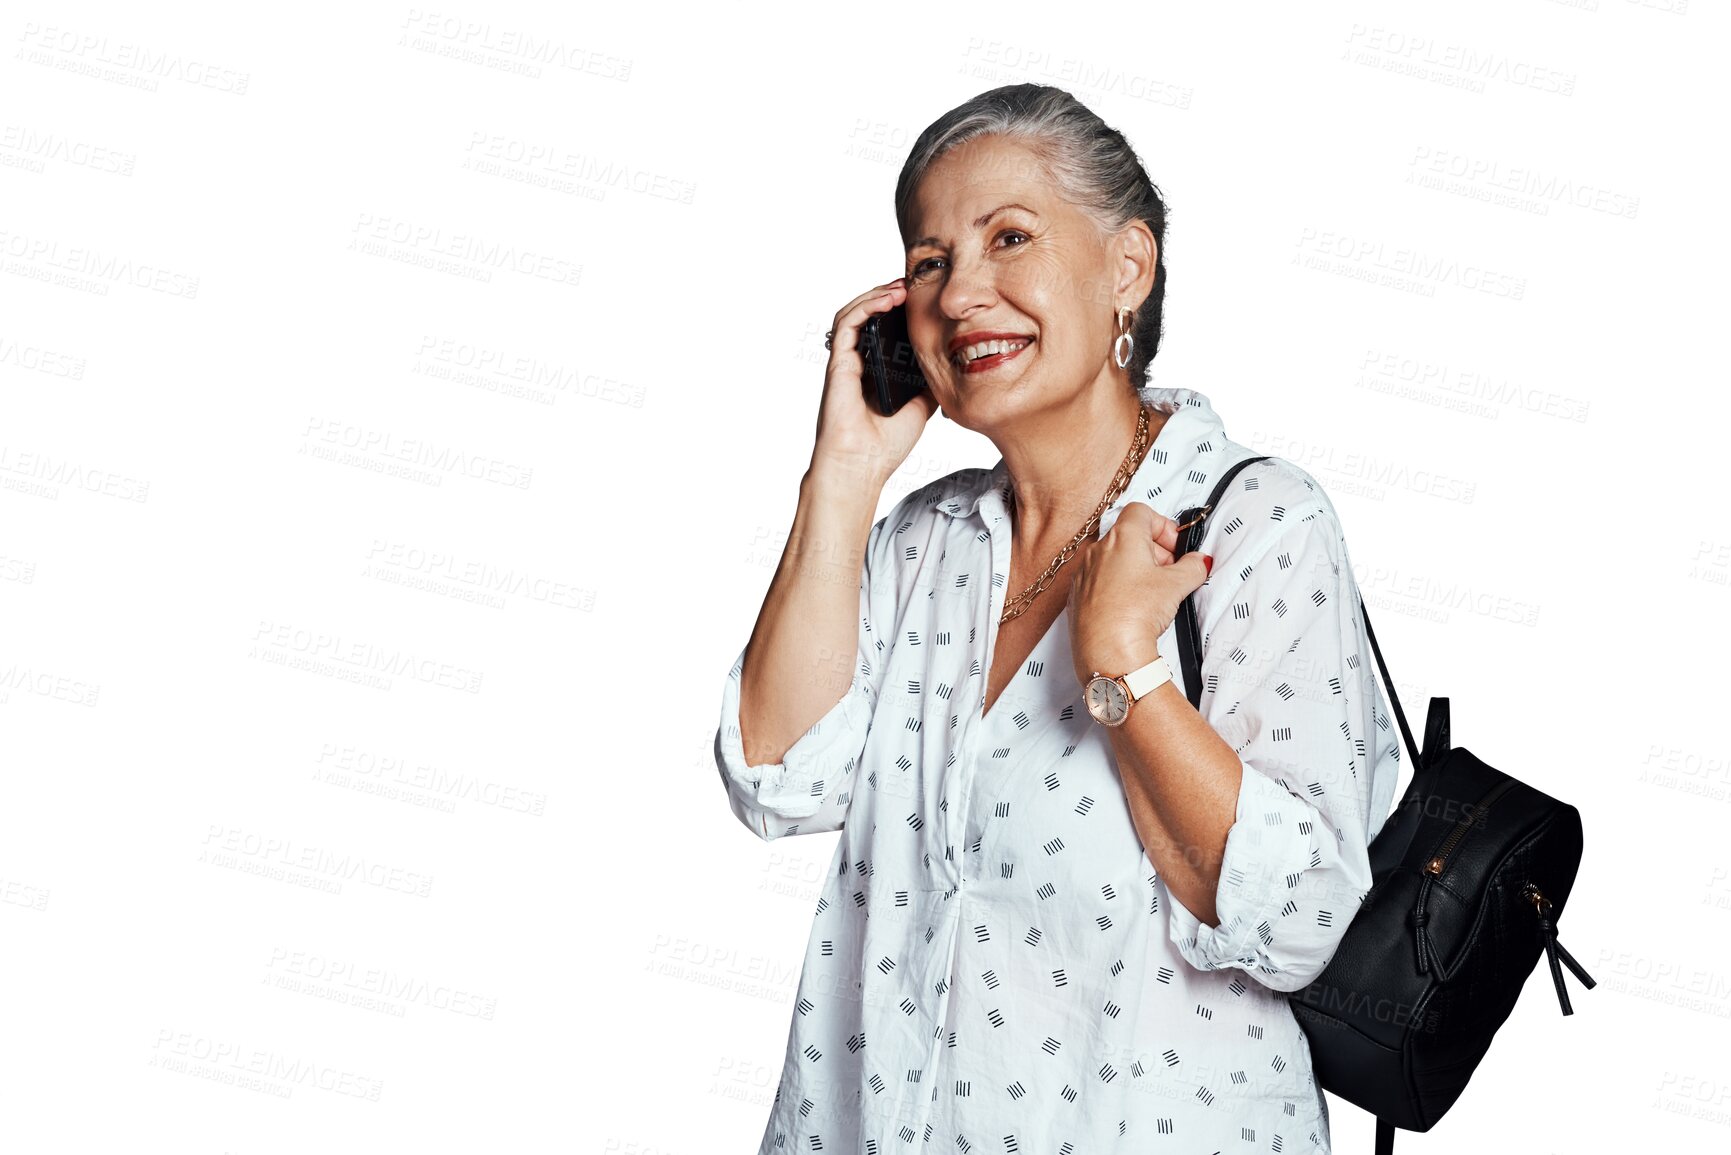 Buy stock photo Mature woman, phone call and communication in conversation, talking and speaking on technology. Senior female person, bag and travel in retirement, happy and isolated on transparent png background